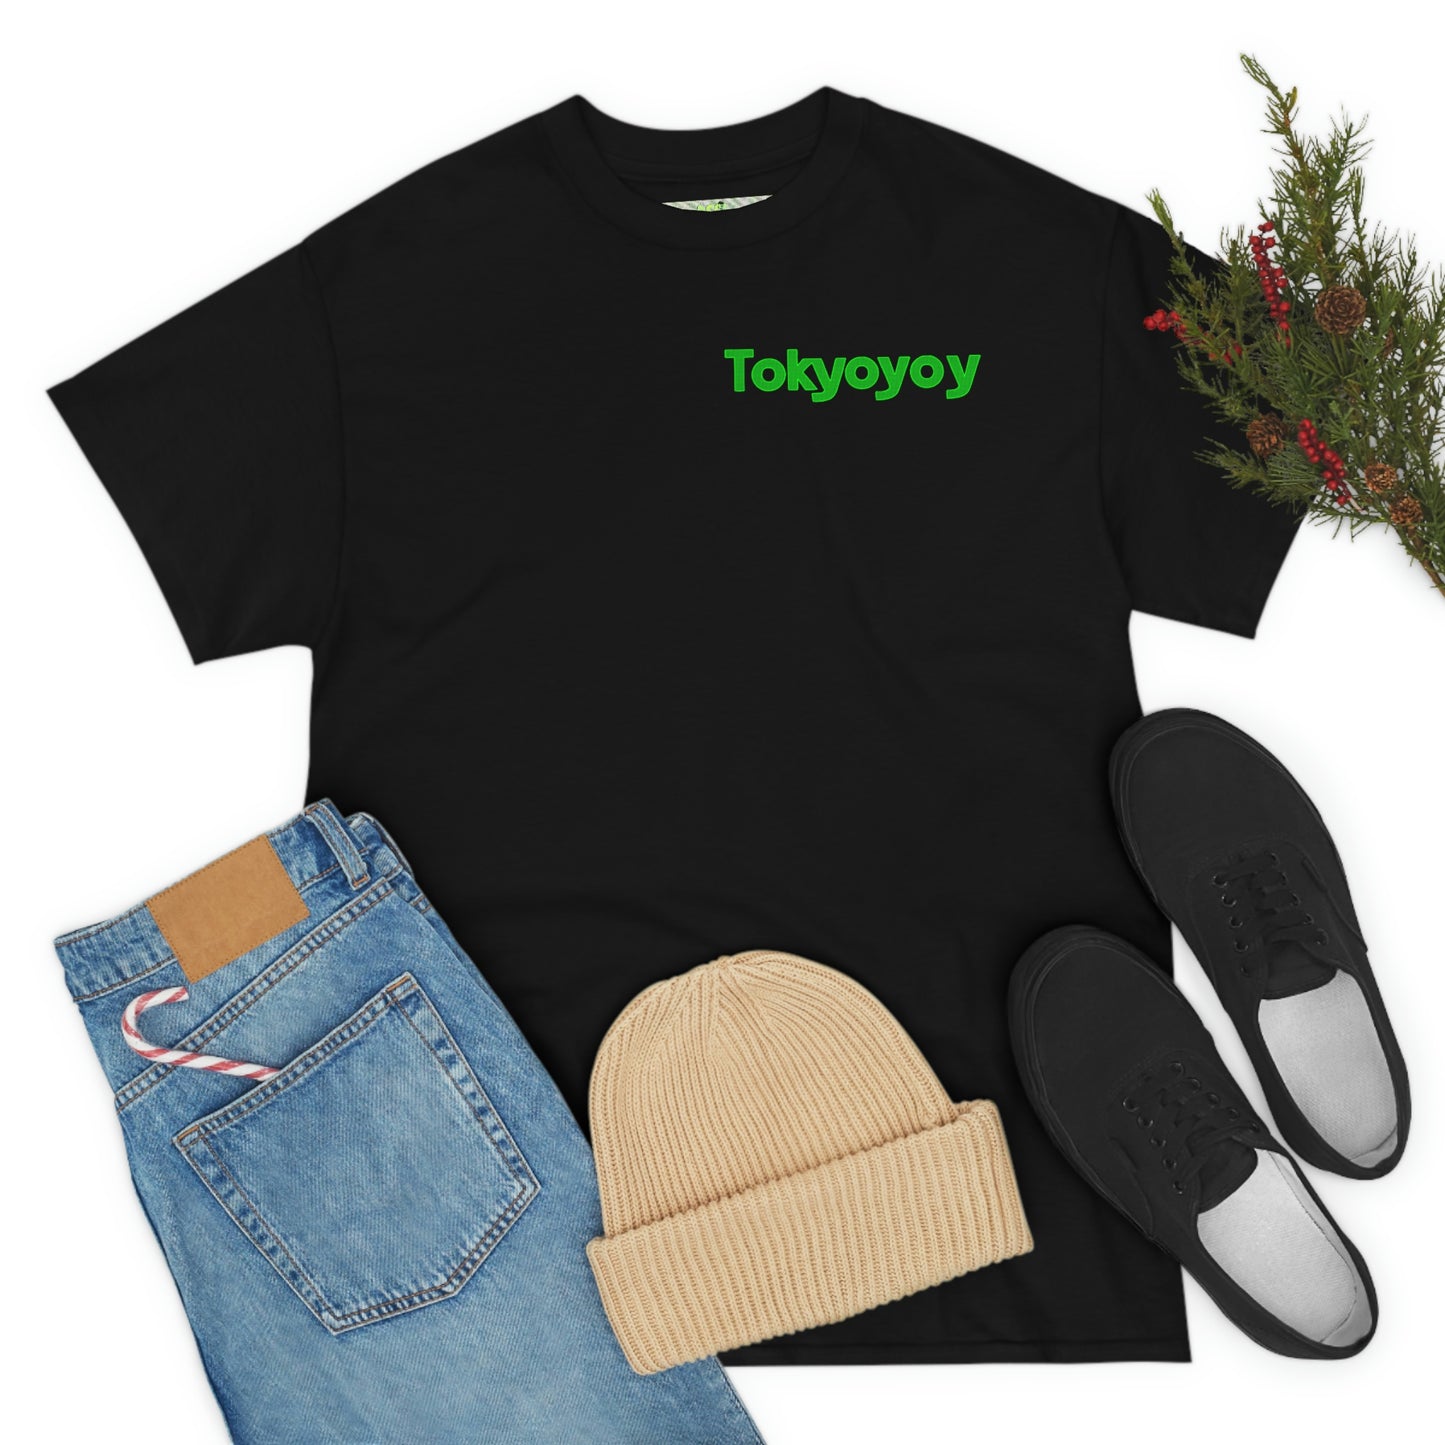 Copy of Tolerate - Indigenous Dystopian Warrior  T-Shirt Collection